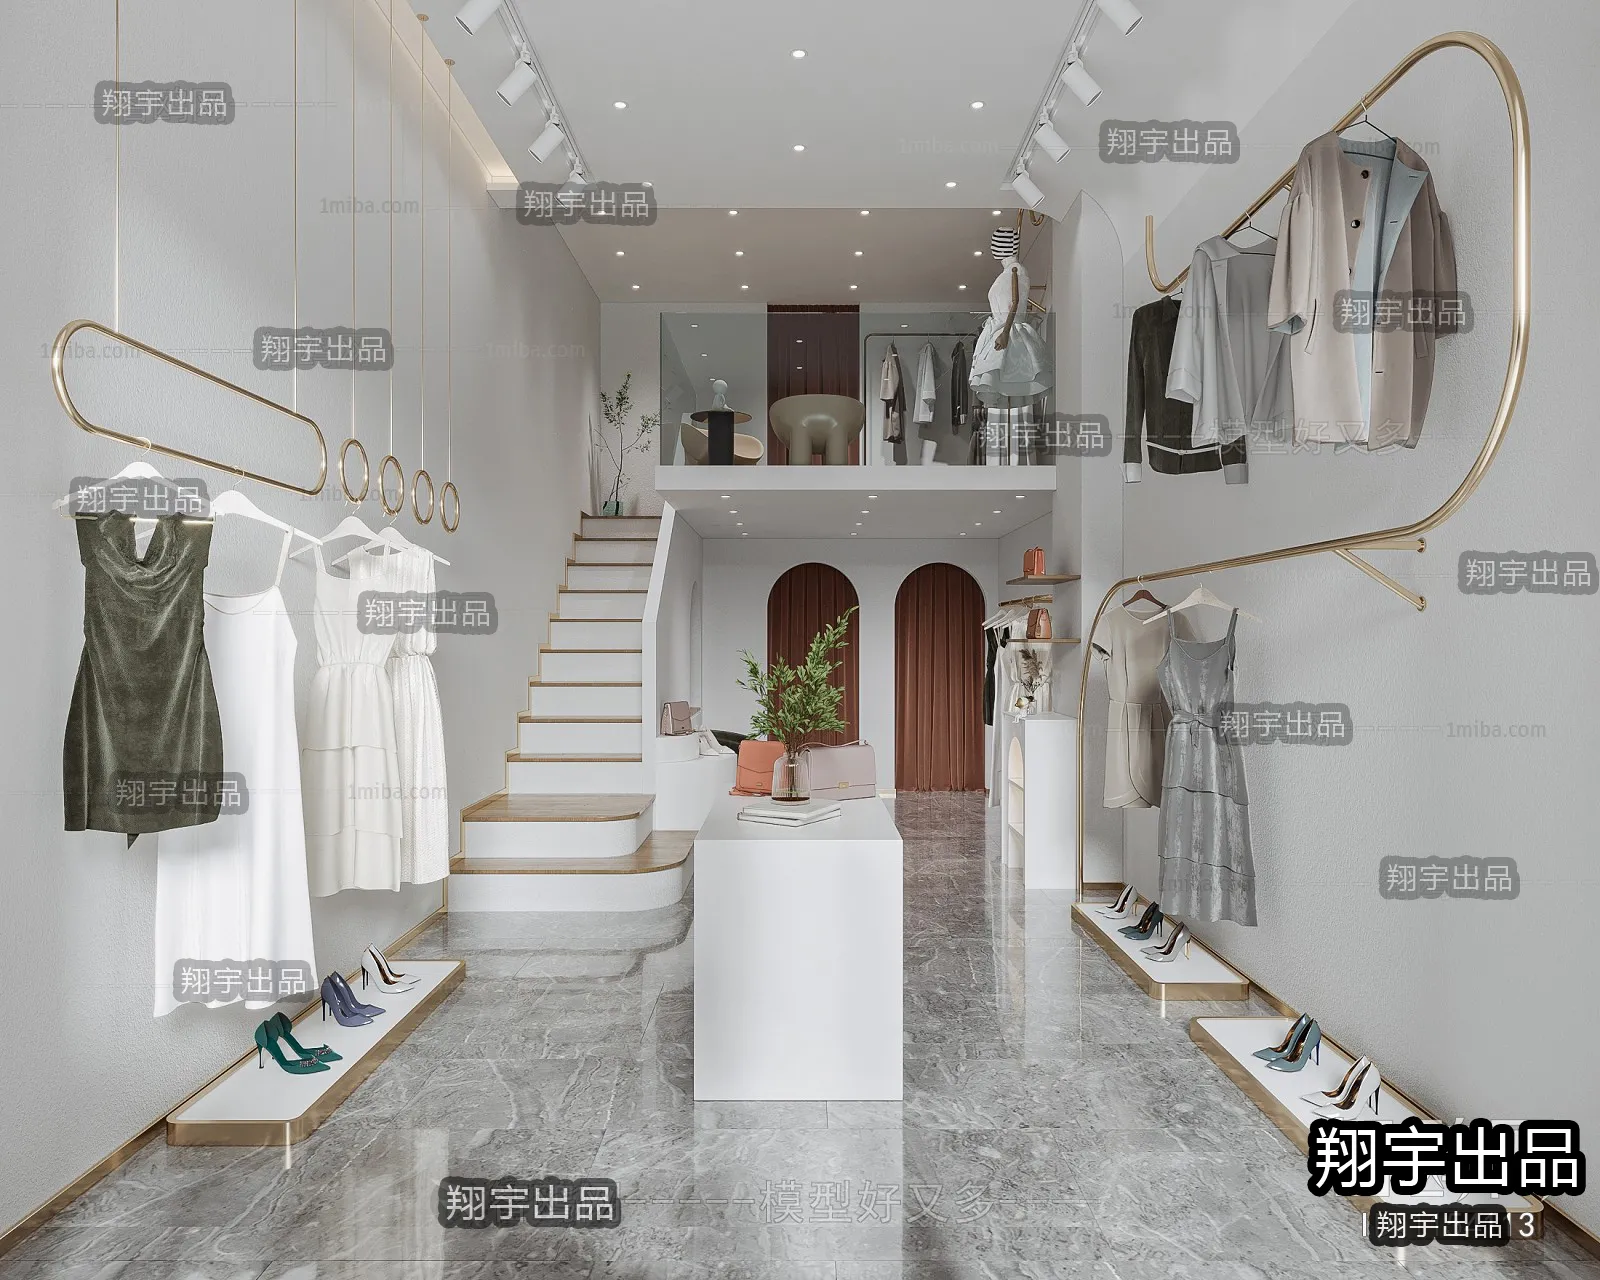 CLOTHING STORE – 3D SCENES – 0001